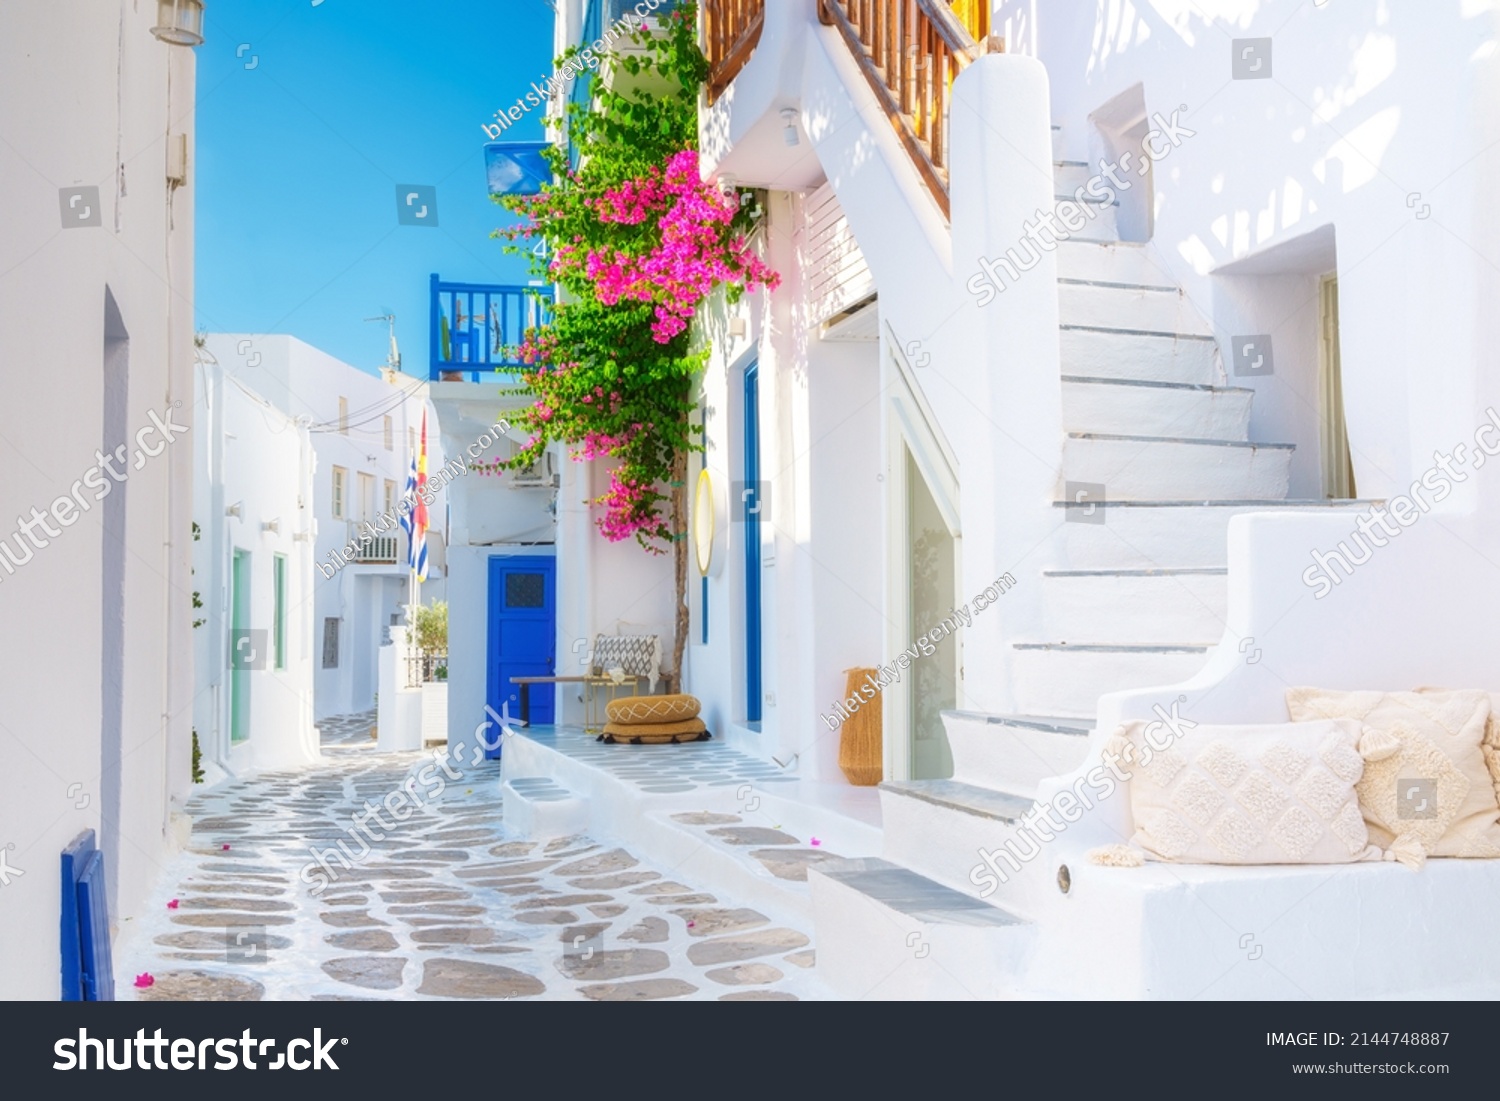 The island of Mykonos, Greece. Streets and traditional architecture. White-colored buildings and bright flowers. Travel photography. #2144748887